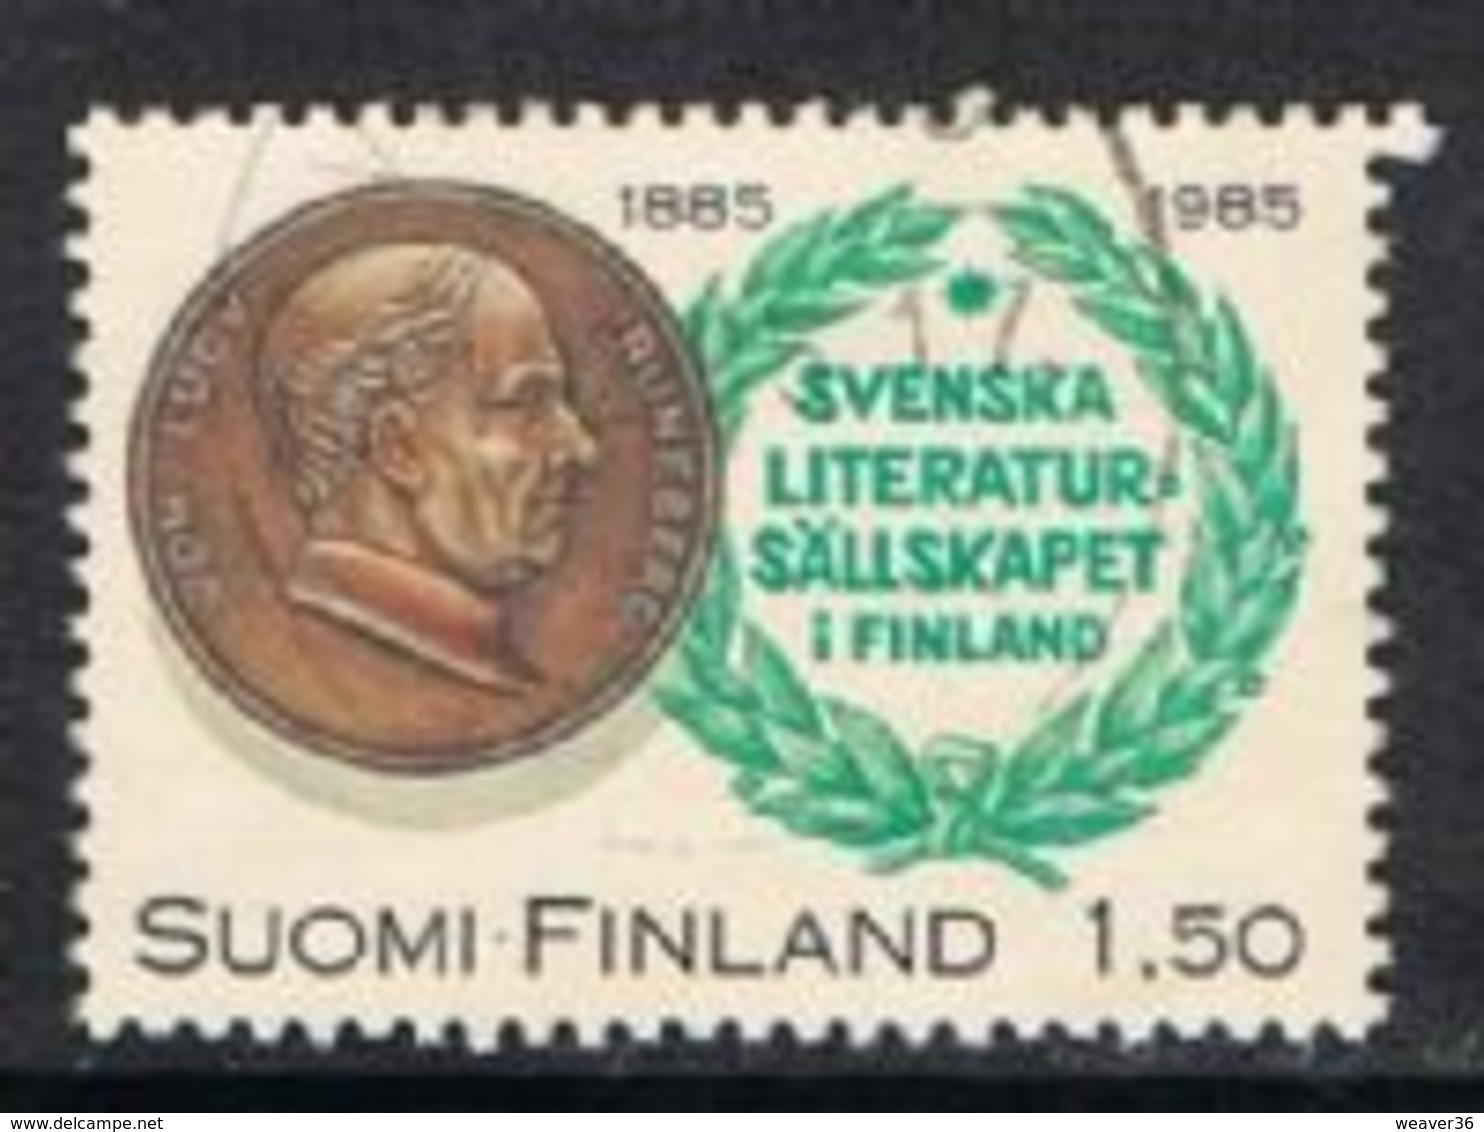 Finland SG1070 1985 Centenary Of Swedish Literature In Finland Society 1m.50 Good/fine Used [13/13937/6D] - Used Stamps